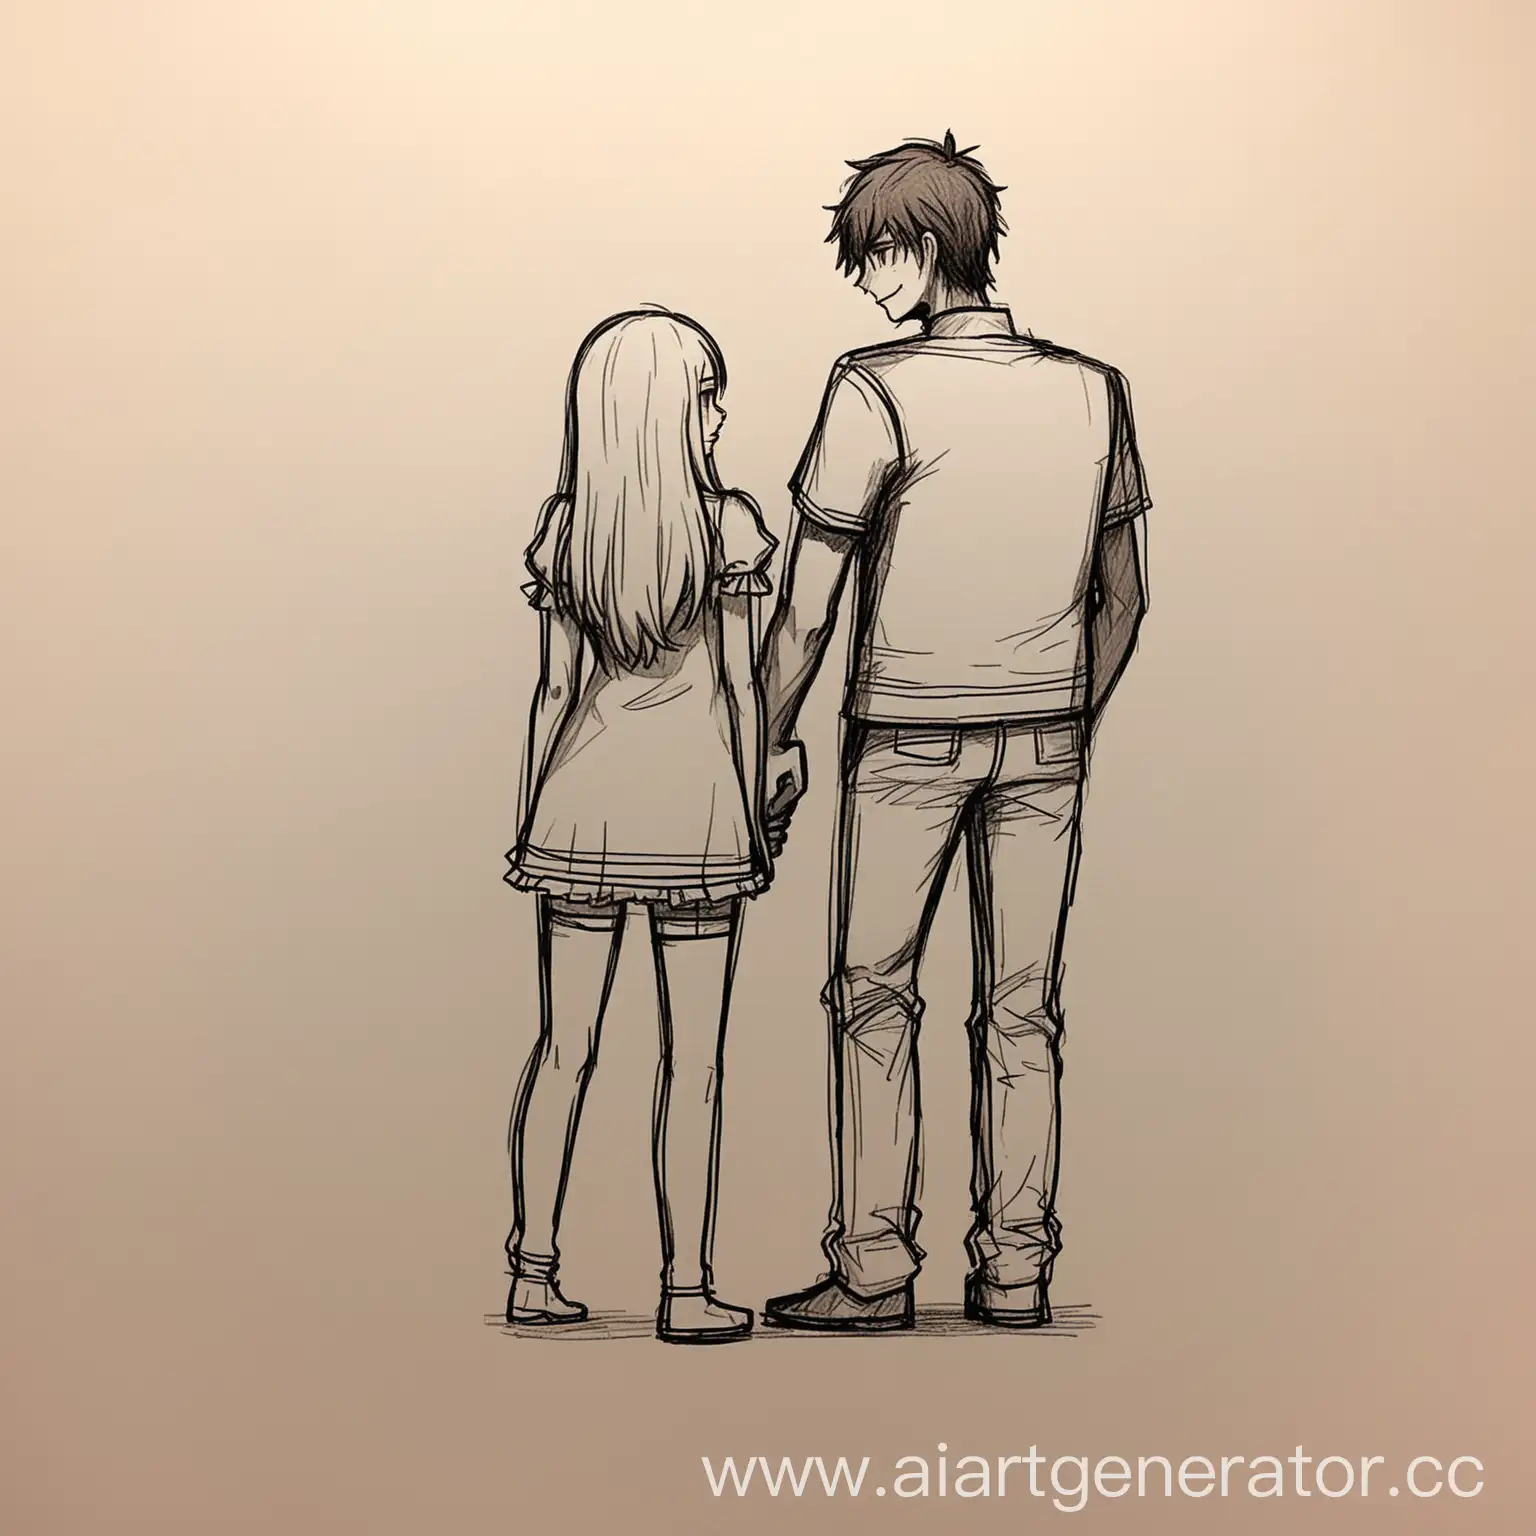 Girl-Standing-Behind-Boy-with-Ambiguous-Intentions